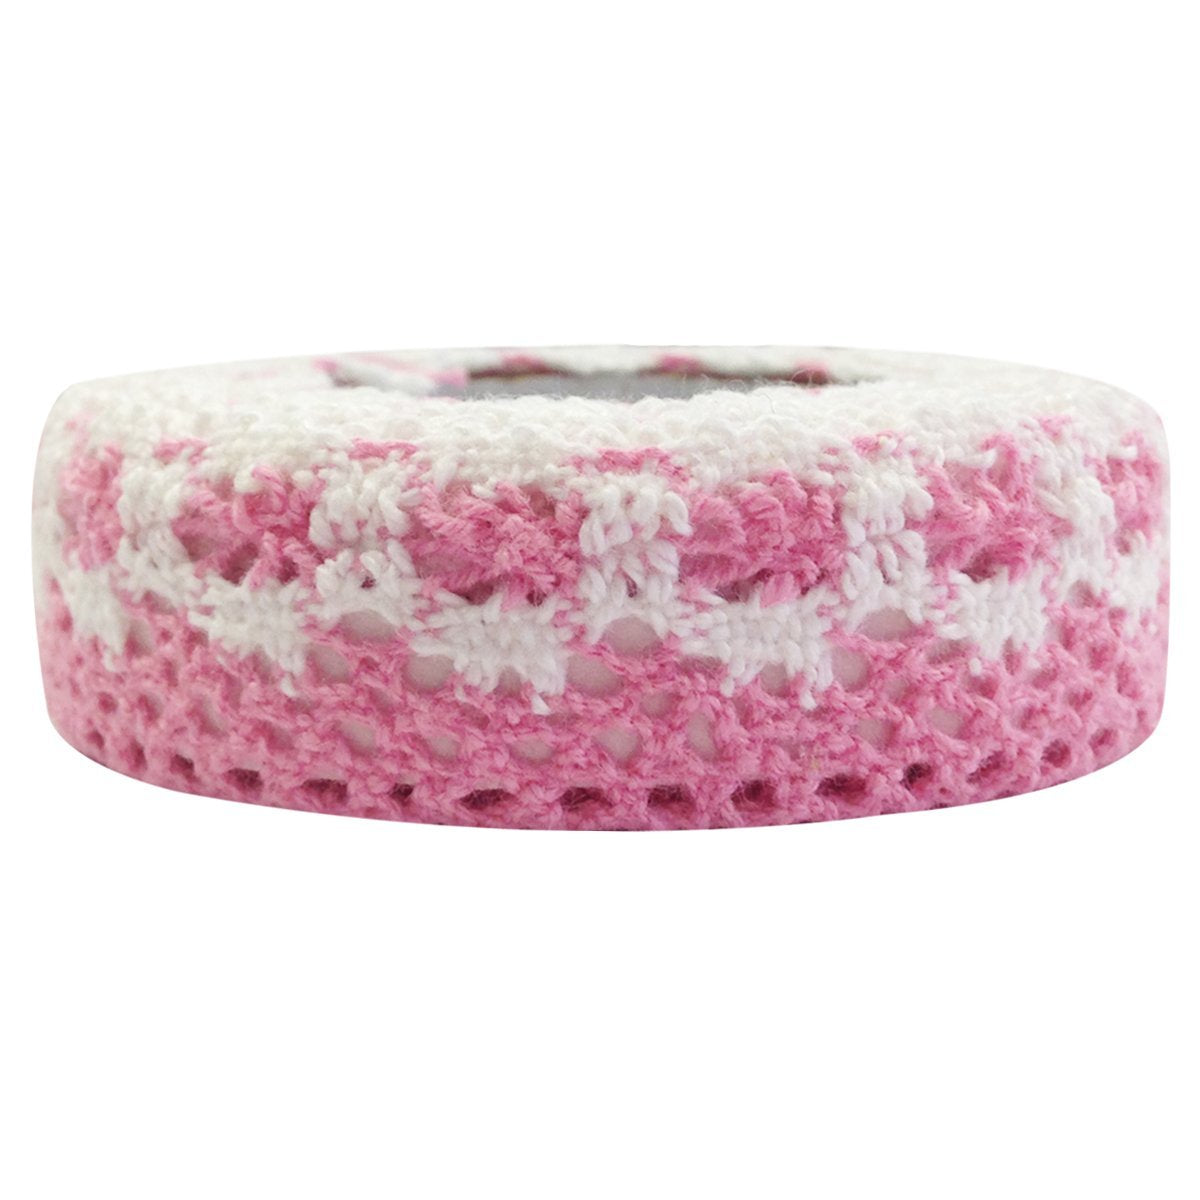 Wrapables Colorful Decorative Adhesive Lace Tape